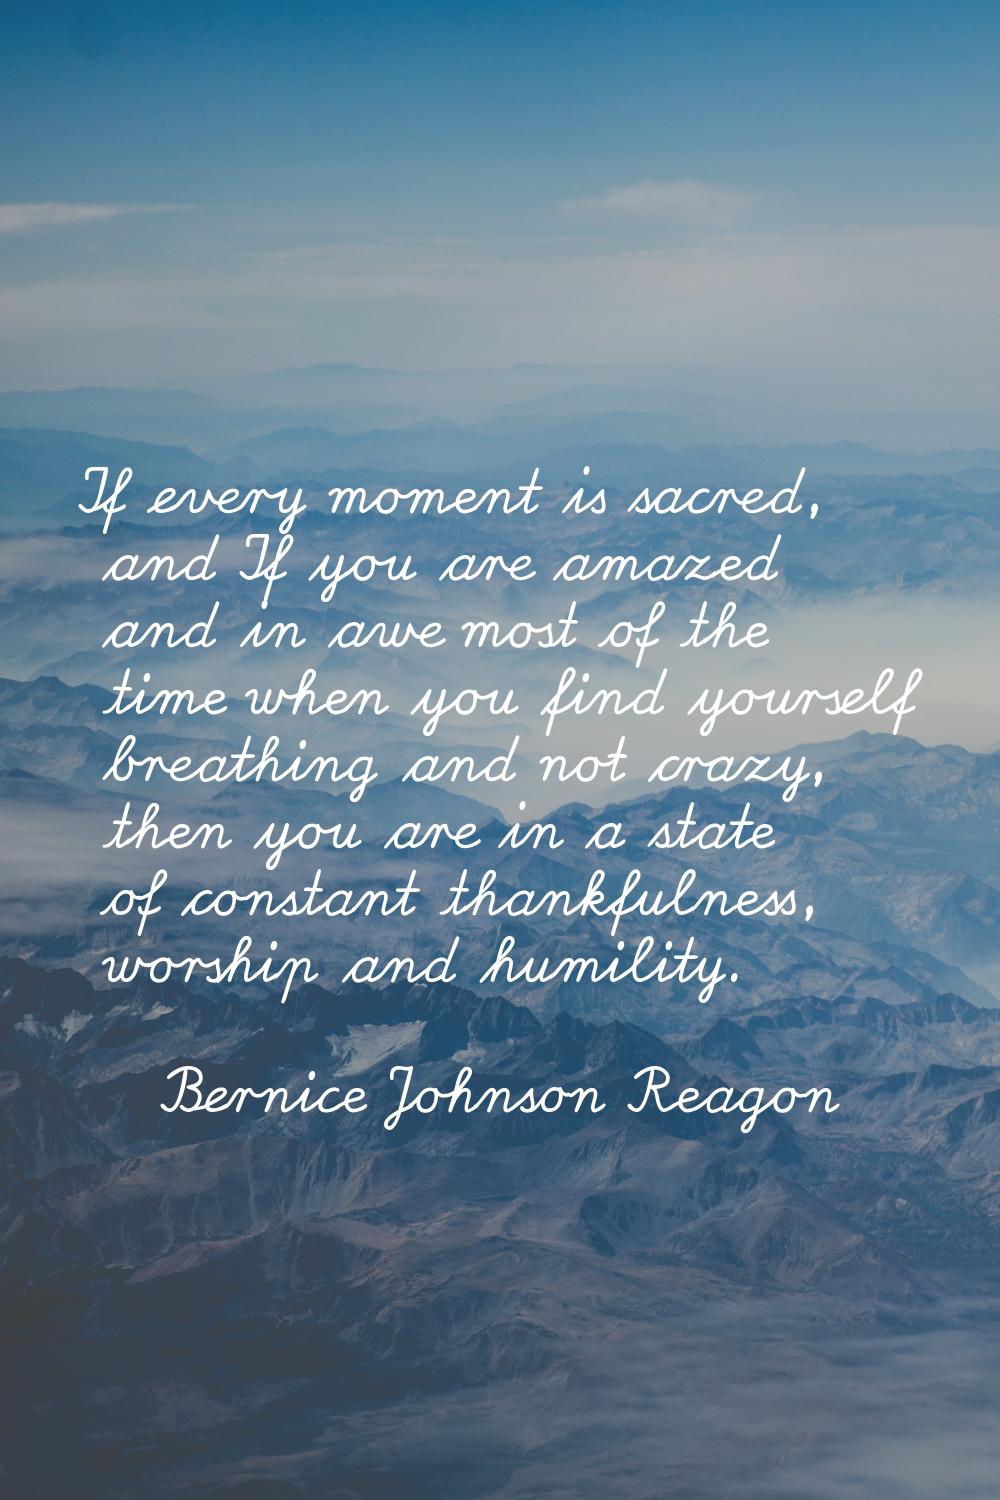 If every moment is sacred, and If you are amazed and in awe most of the time when you find yourself